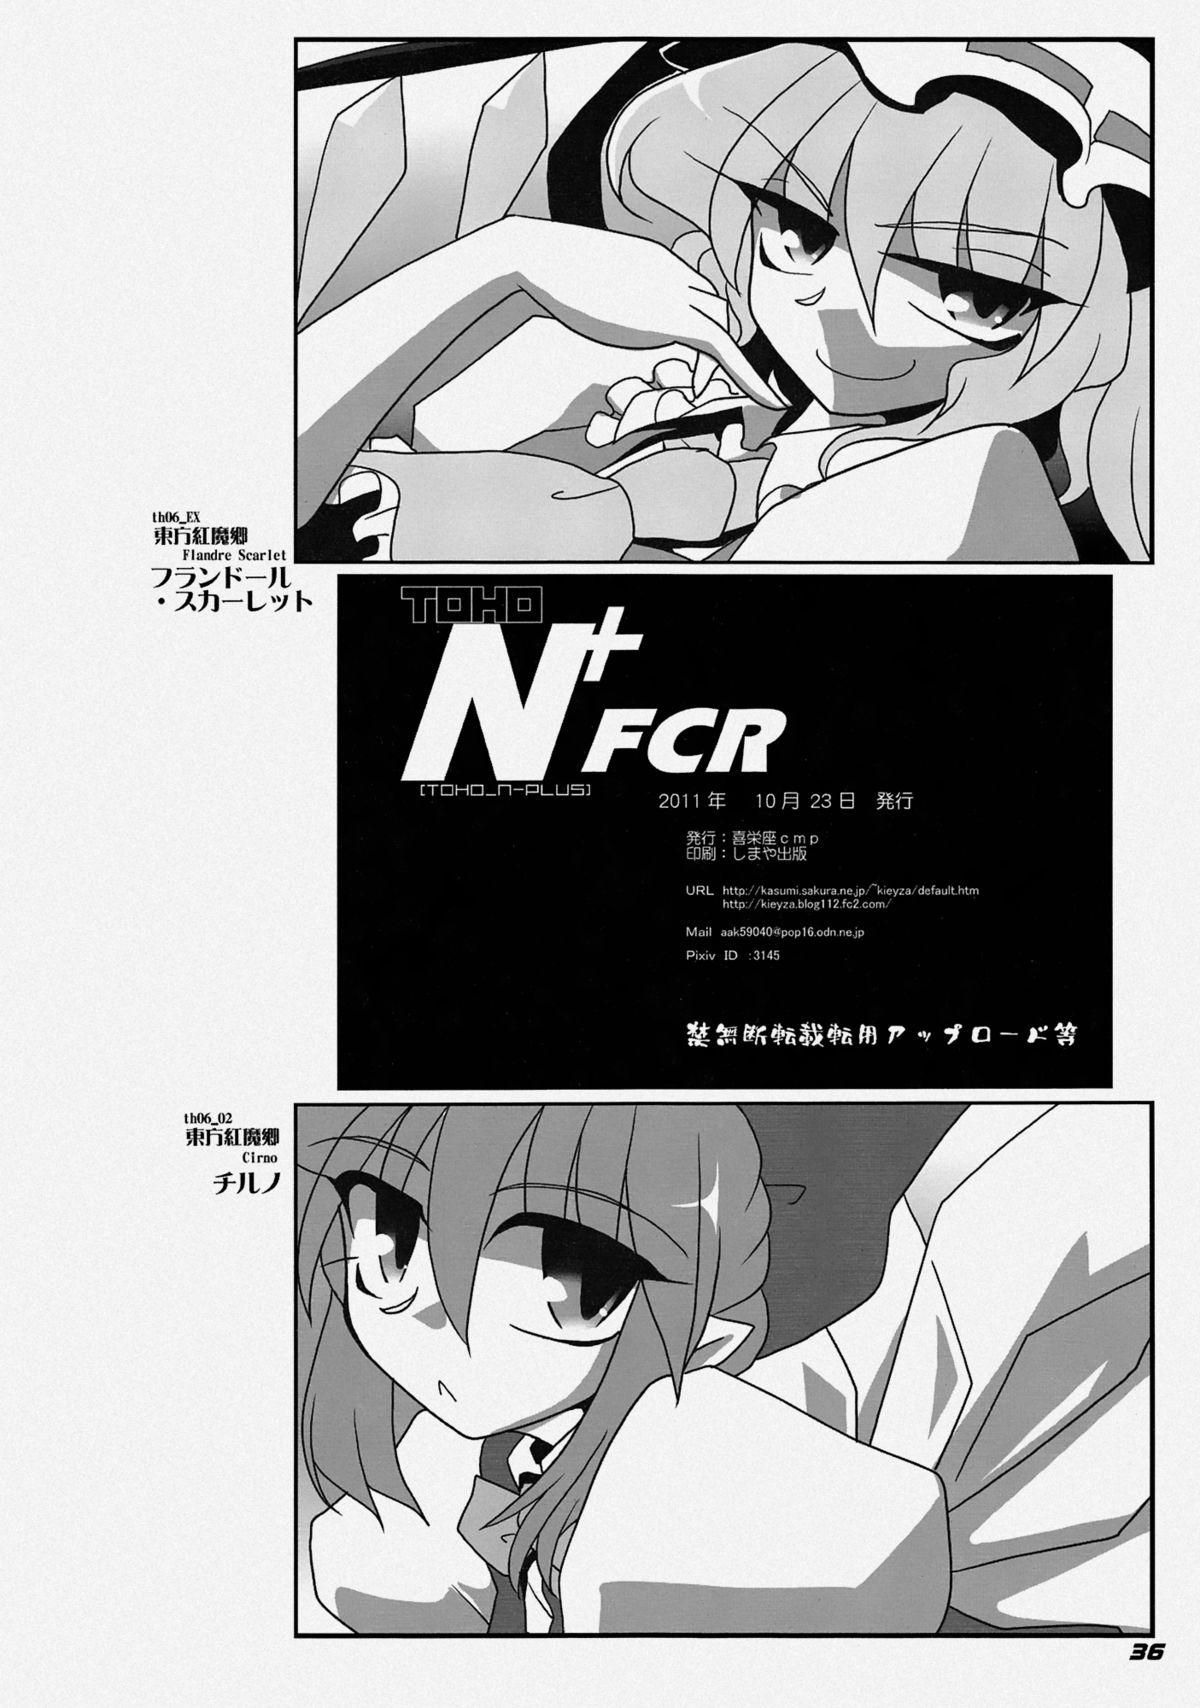 Exhibitionist TOHO N+ FCR - Touhou project Job - Page 39